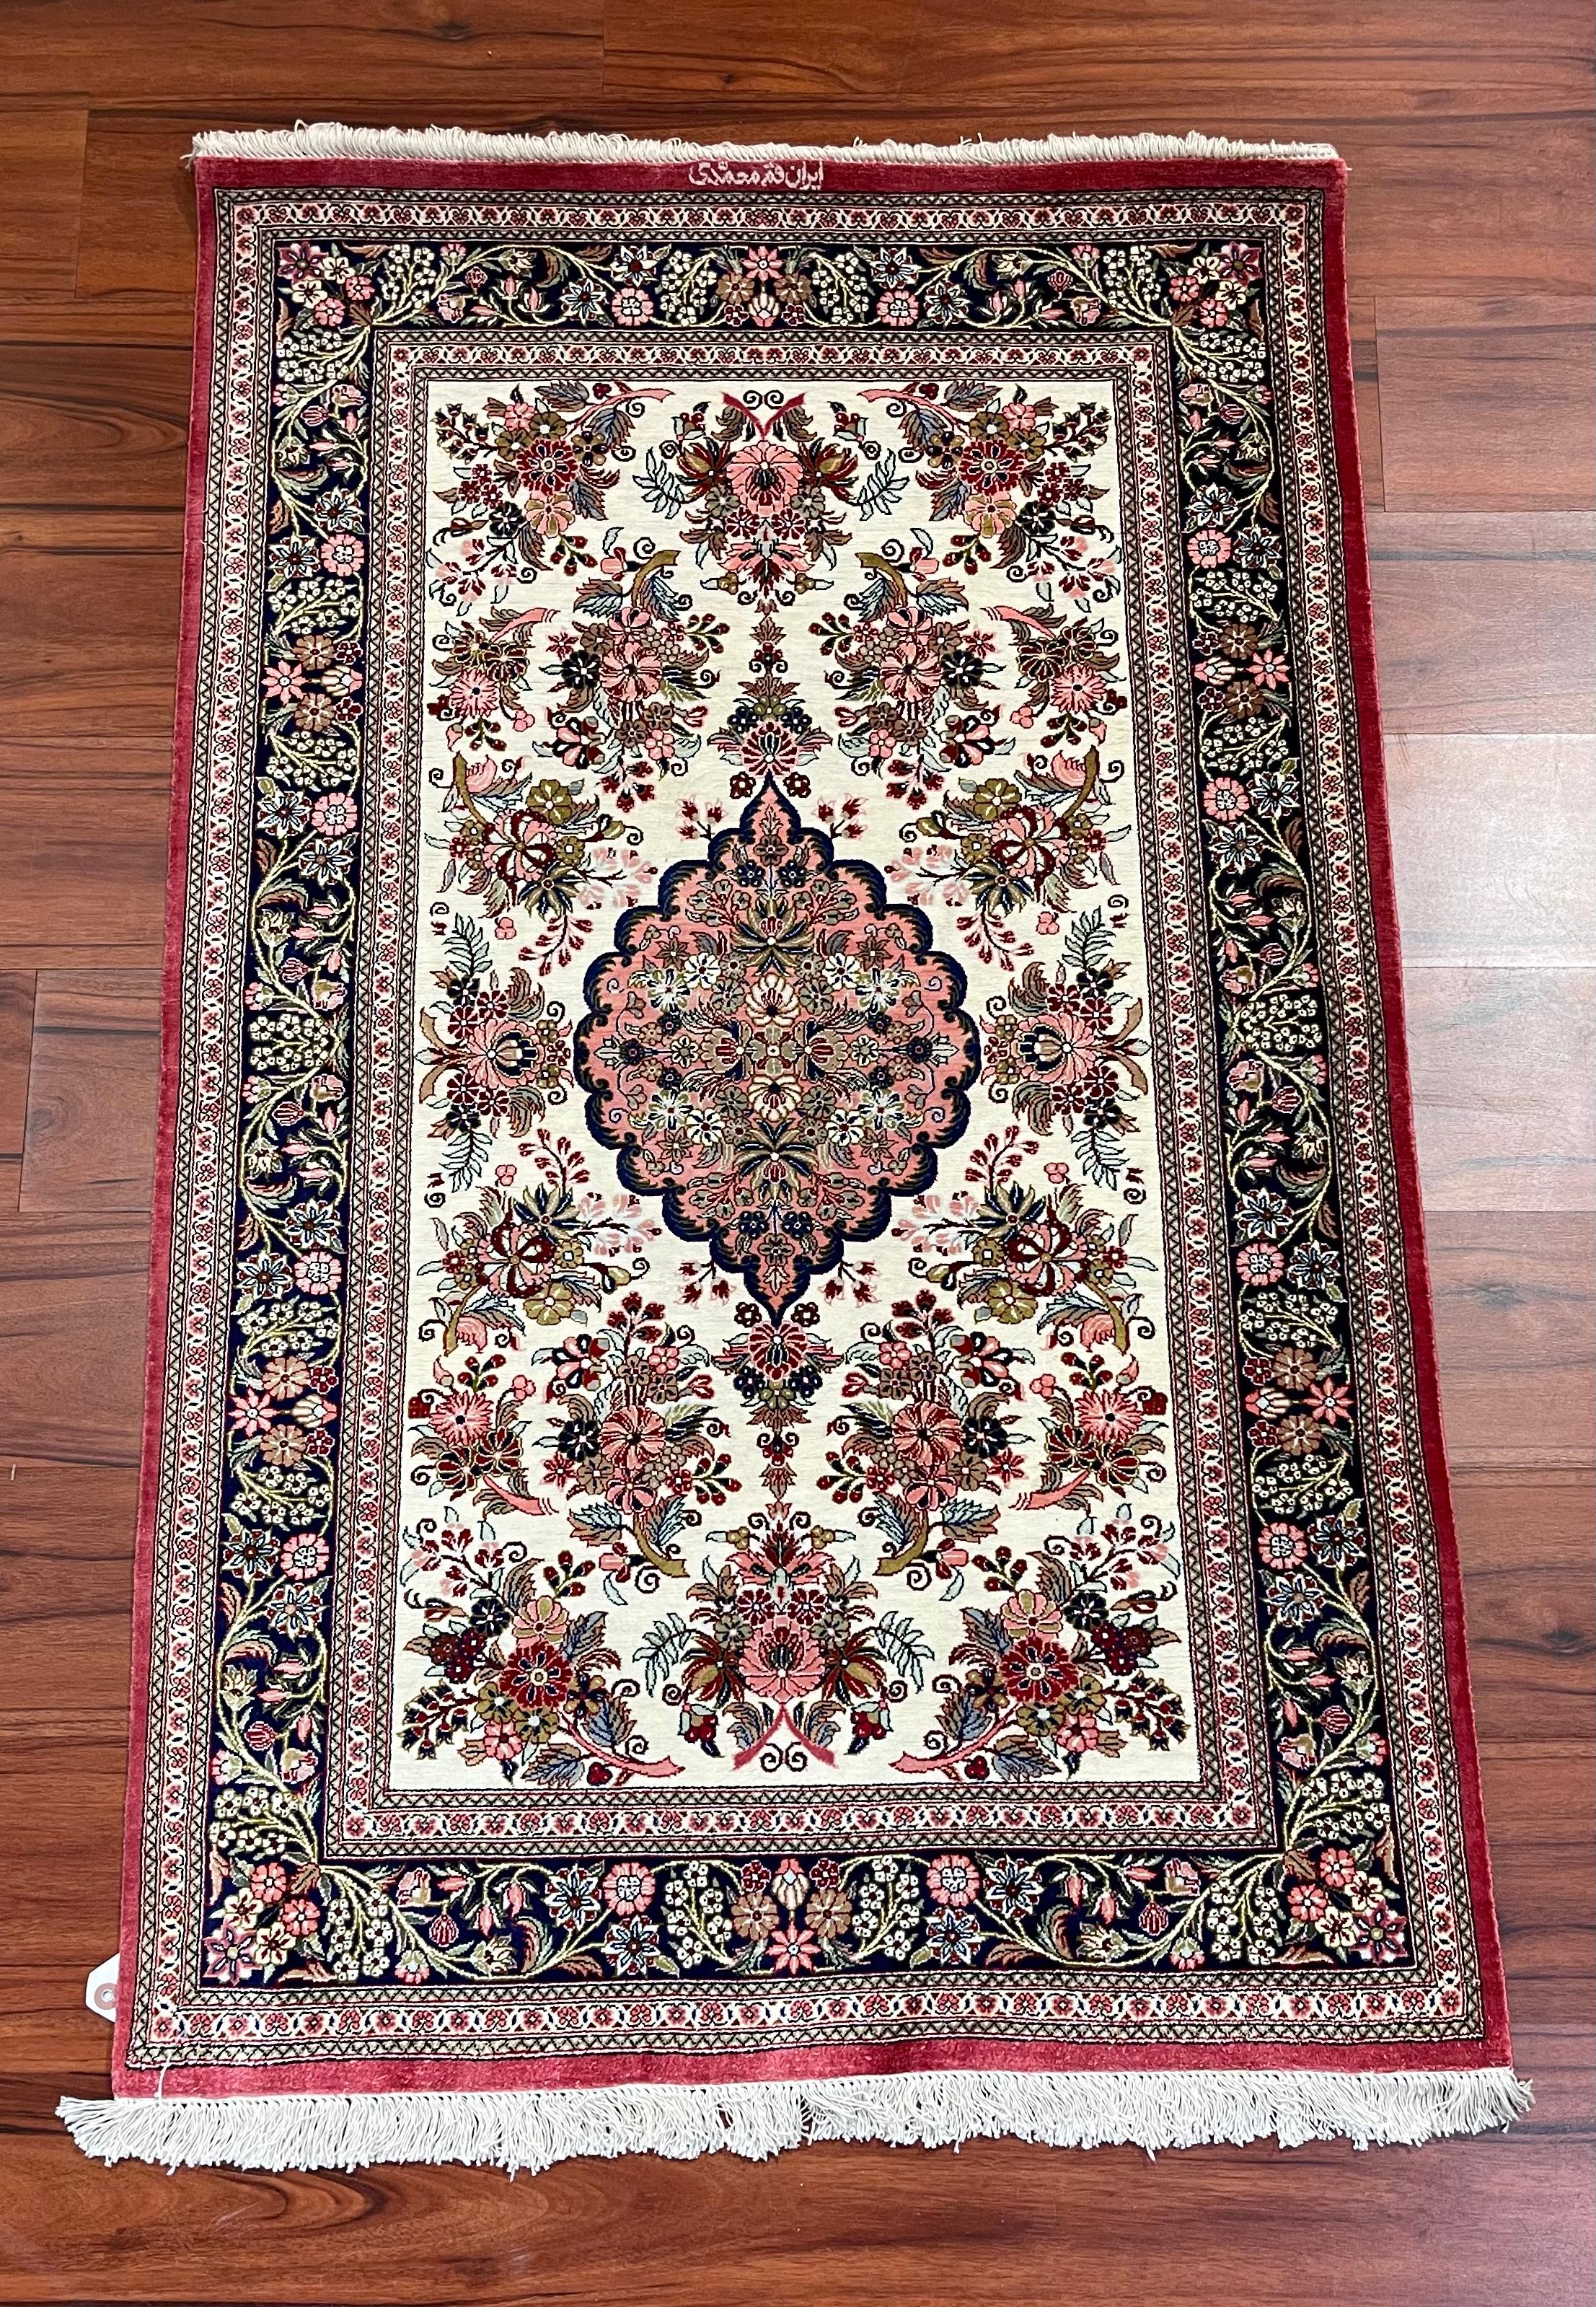 A Stunning 100% Persian Silk Qum rug Orignated from Iran in the late 20th Century. This piece is hand-Knotted and is in excellent condition. Feel free to message me with any questions or offers!.